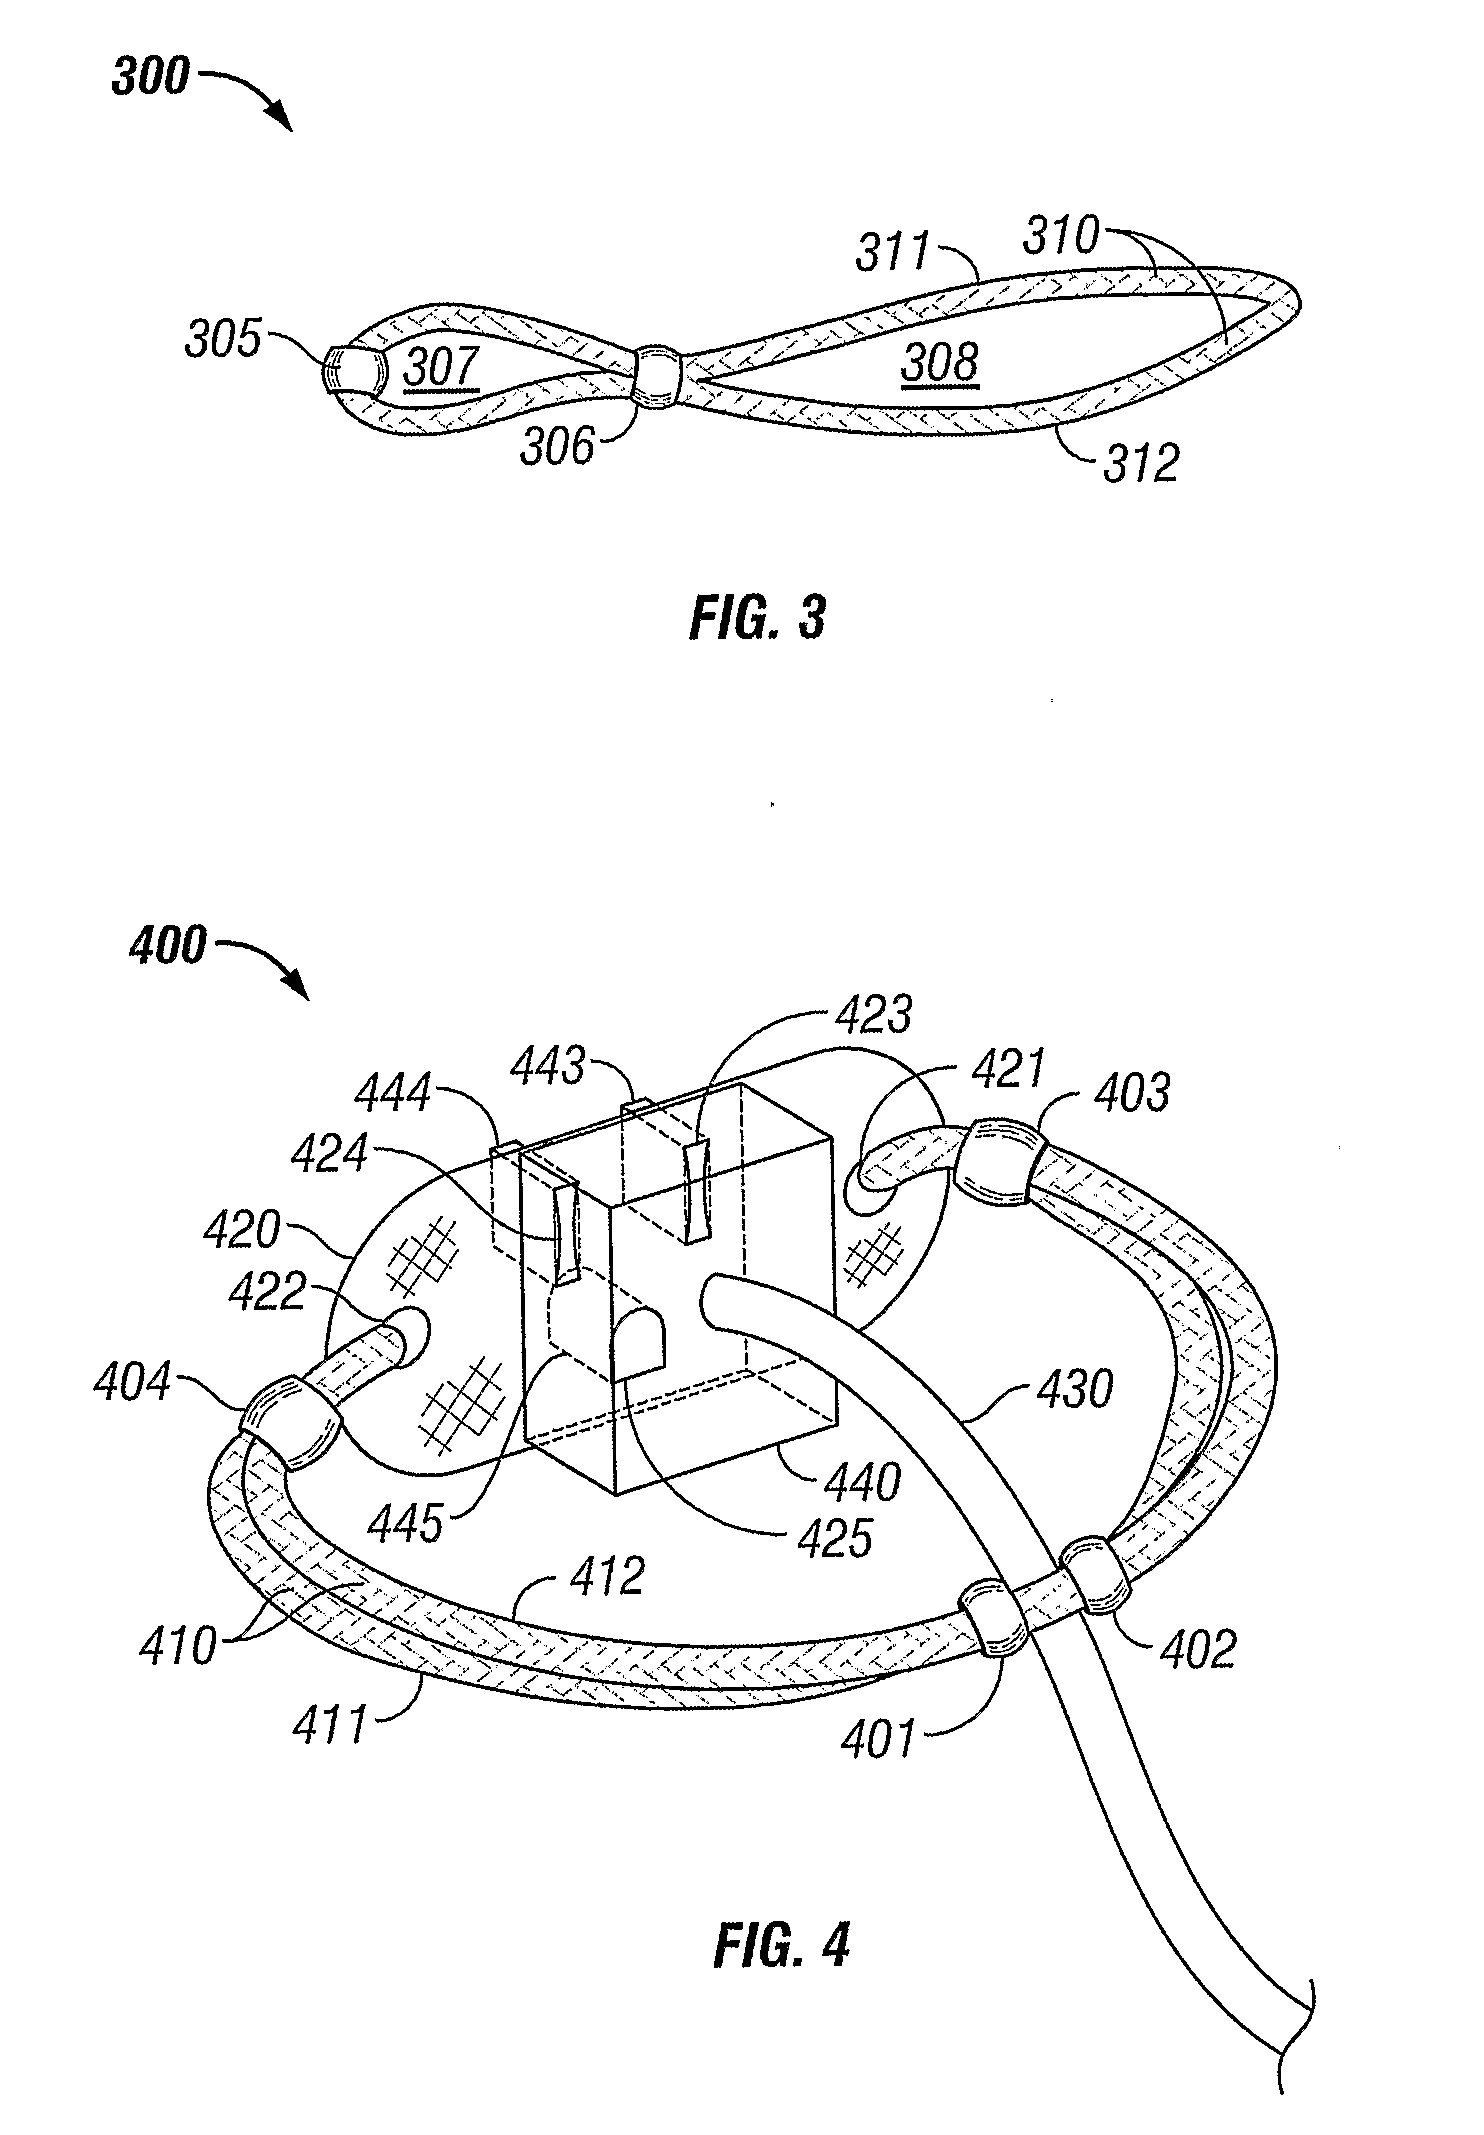 Apparatus to Assist in Removing an Electrical Plug from a Socket